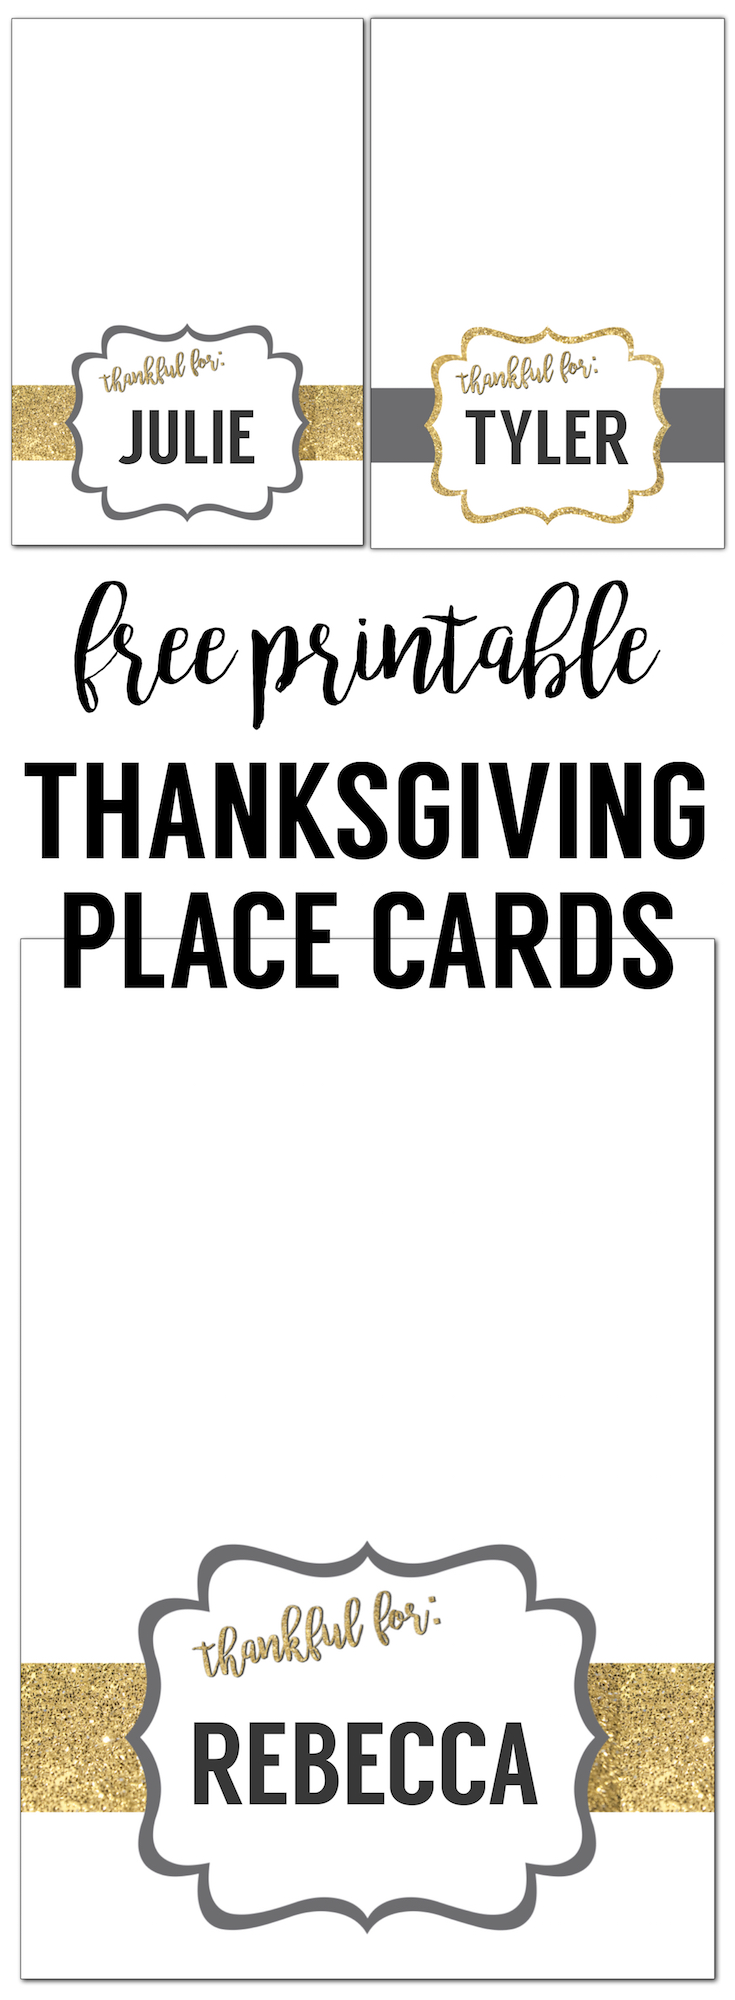 Free printable Thanksgiving place cards. These "thankful for" gold and grey colored place cards are a fun easy DIY for your Thanksgiving dinner table.